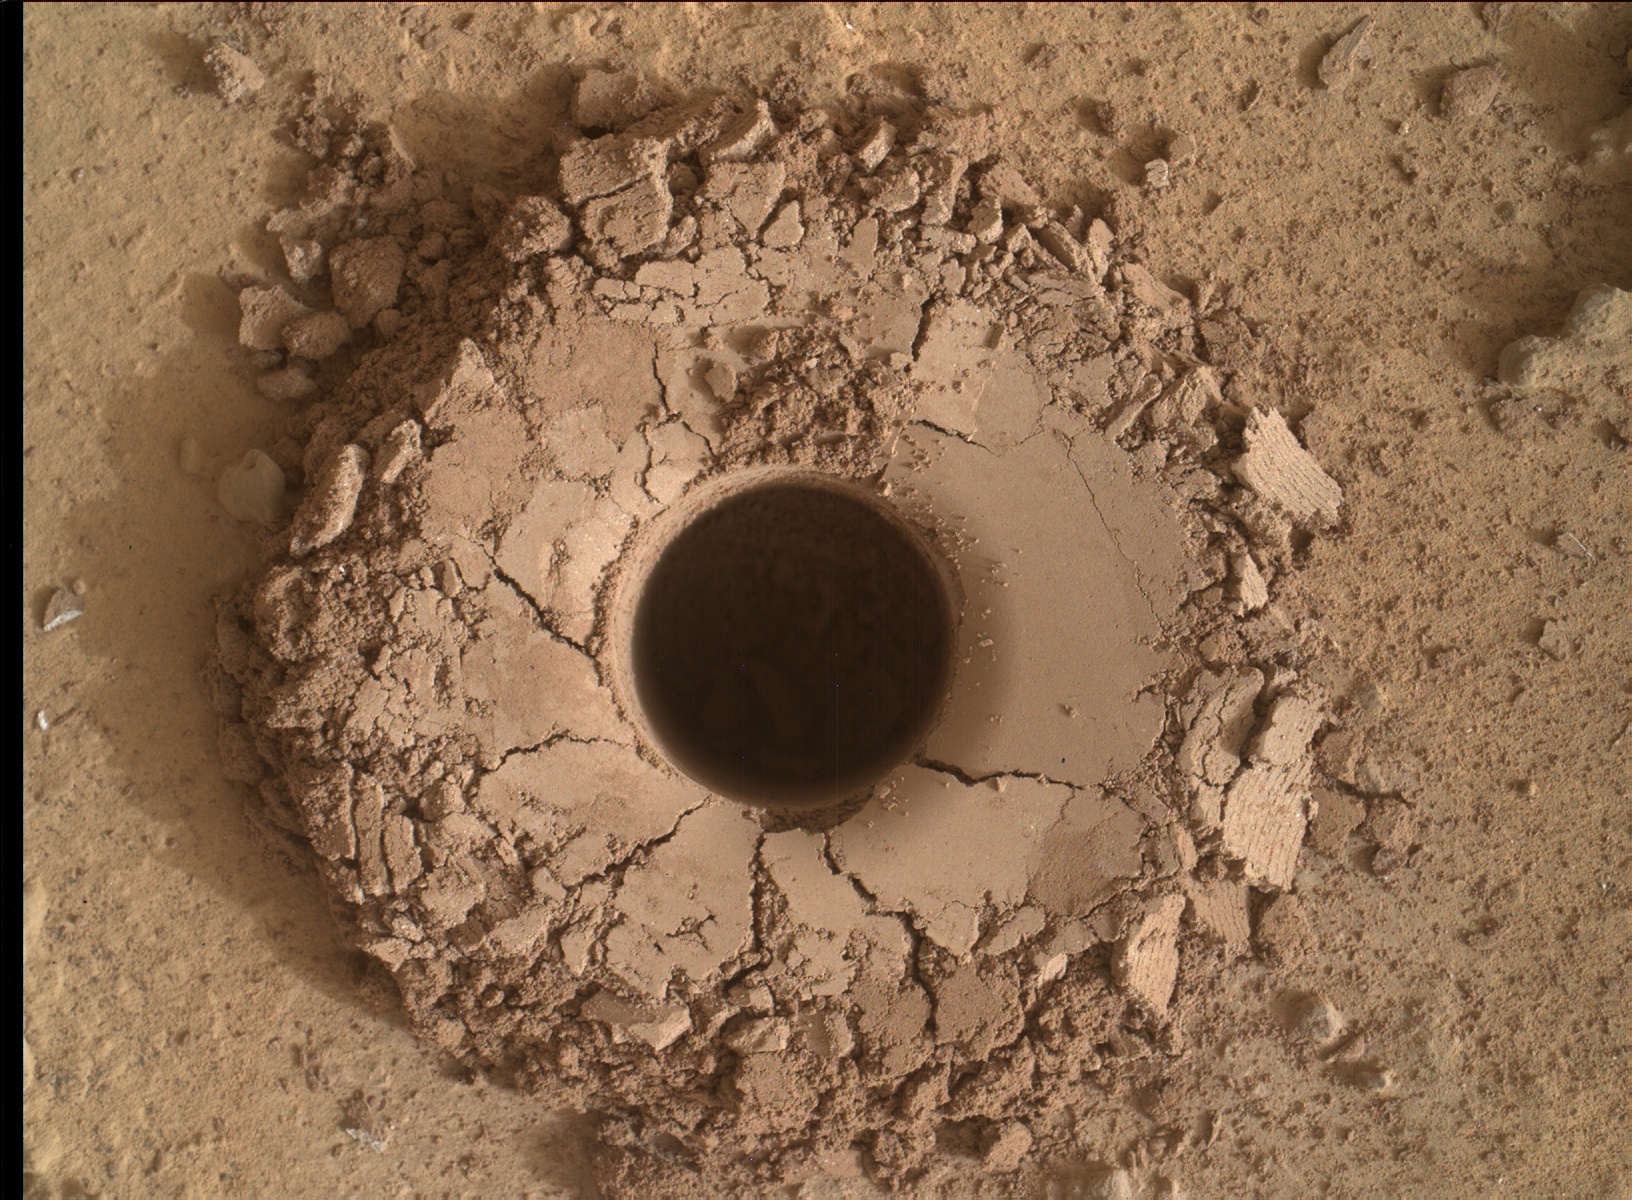 Quela drill hole bored by Curiosity rover on Sol 1464, Sept. 18, 2016 as seen in this Matscam color image taken the same Sol. Credit: NASSA/JPL/MSSS 